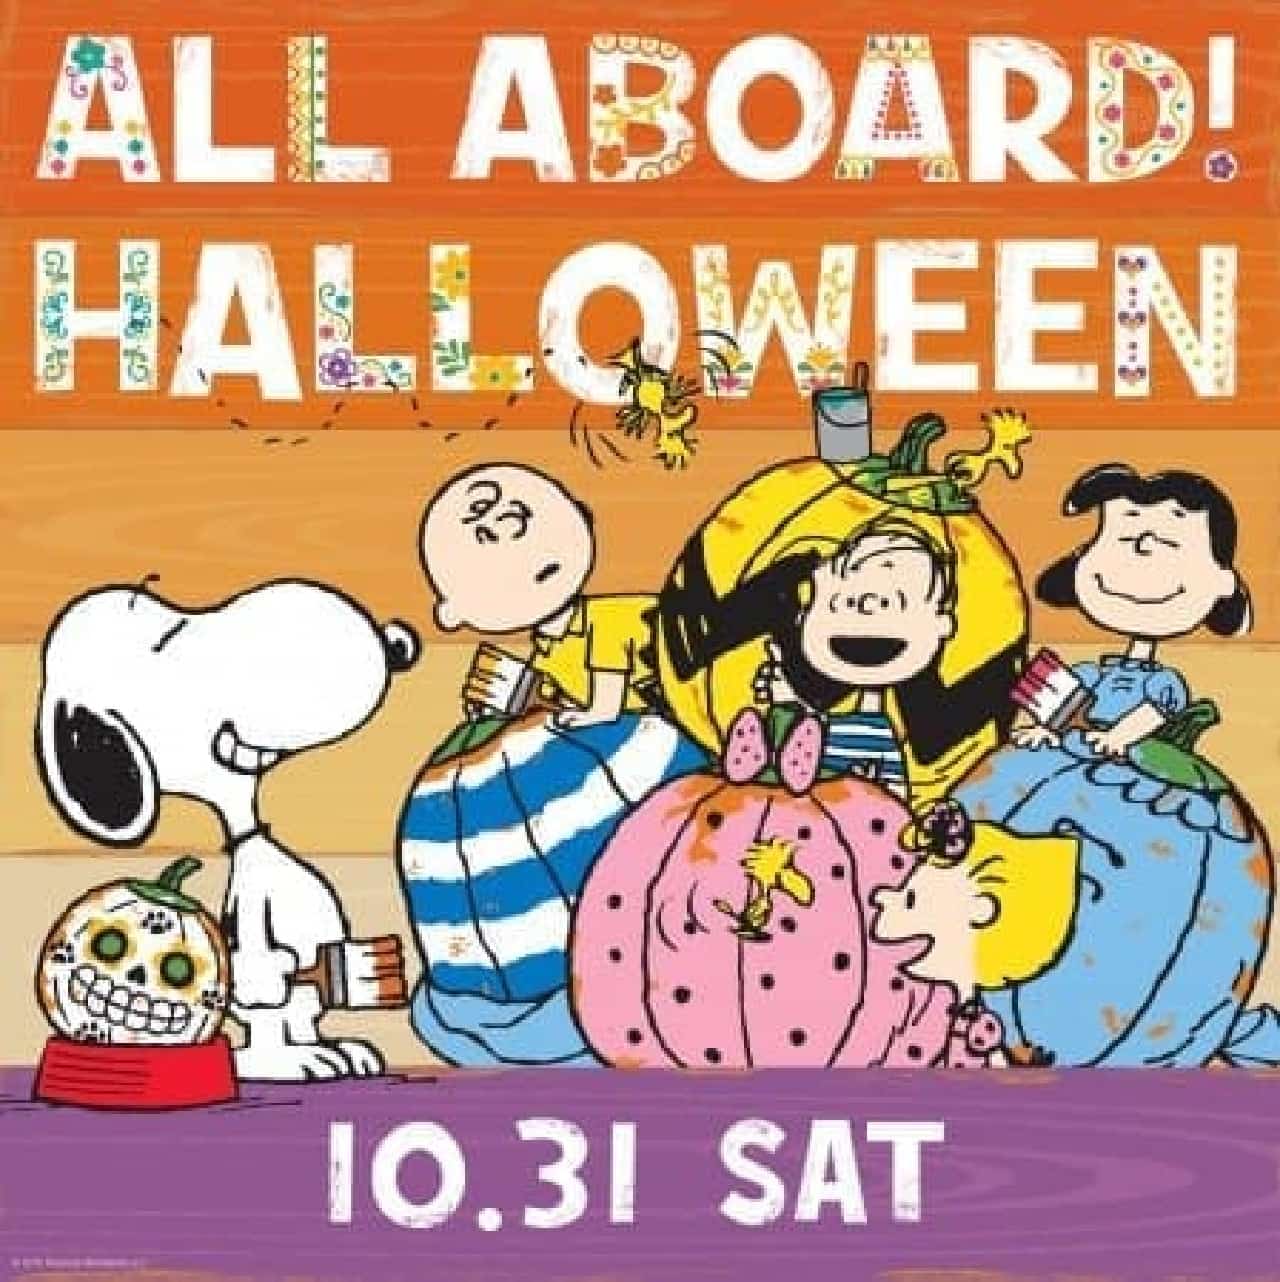 The main character is "Peanuts" again this year!